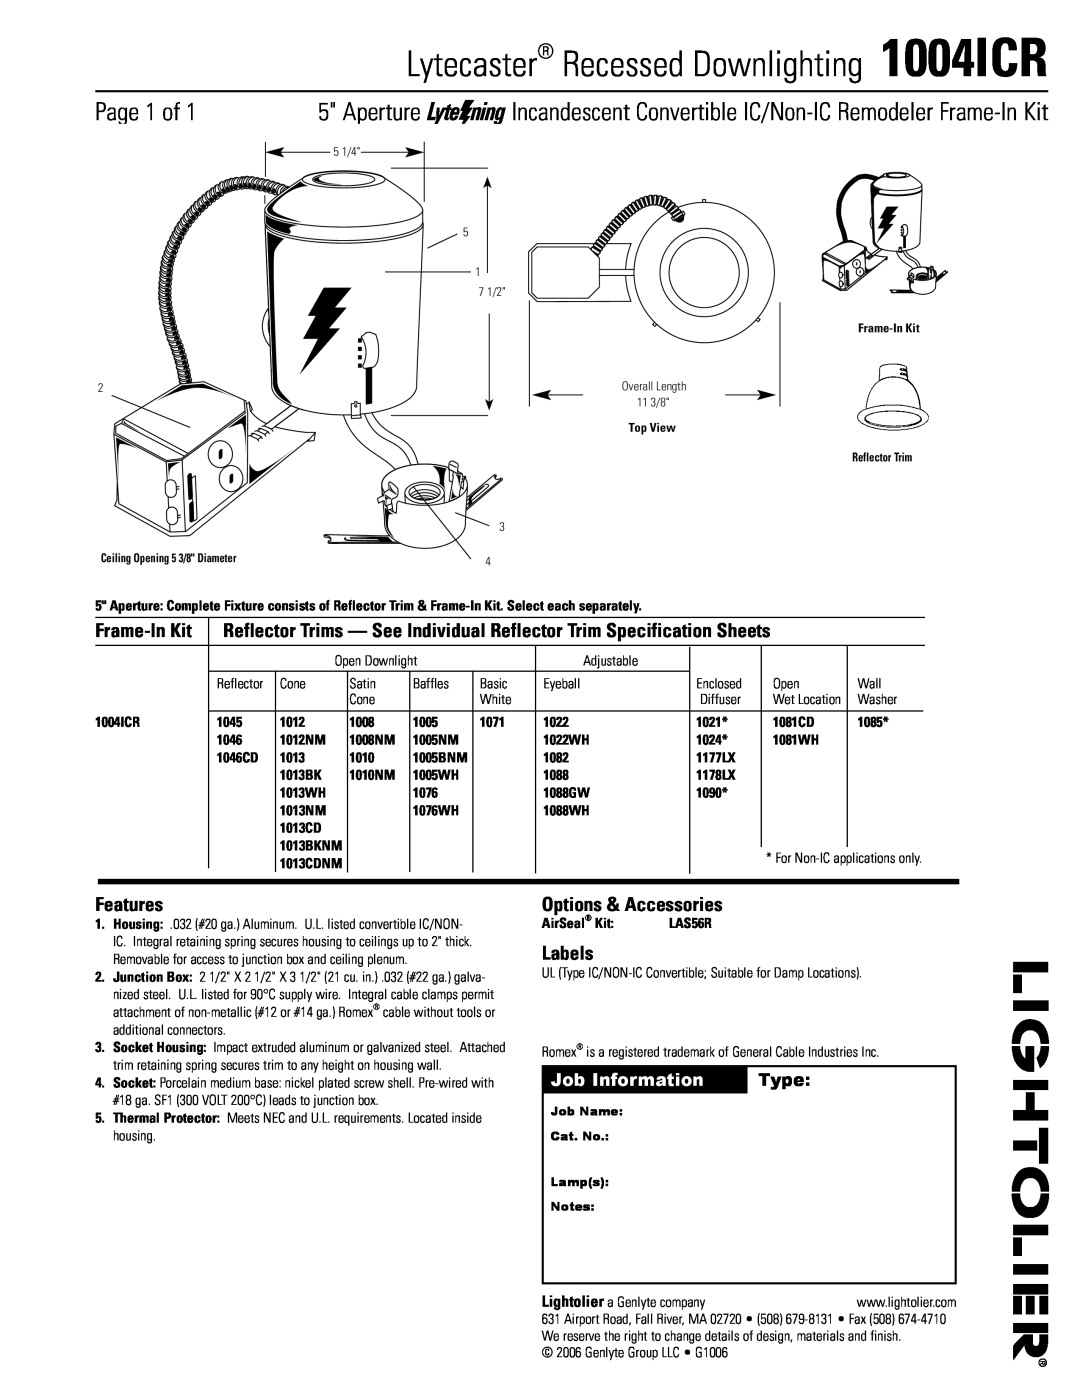 Lightolier specifications Lytecaster Recessed Downlighting 1004ICR, Page 1 of, Frame-InKit, Features, Labels, Type 